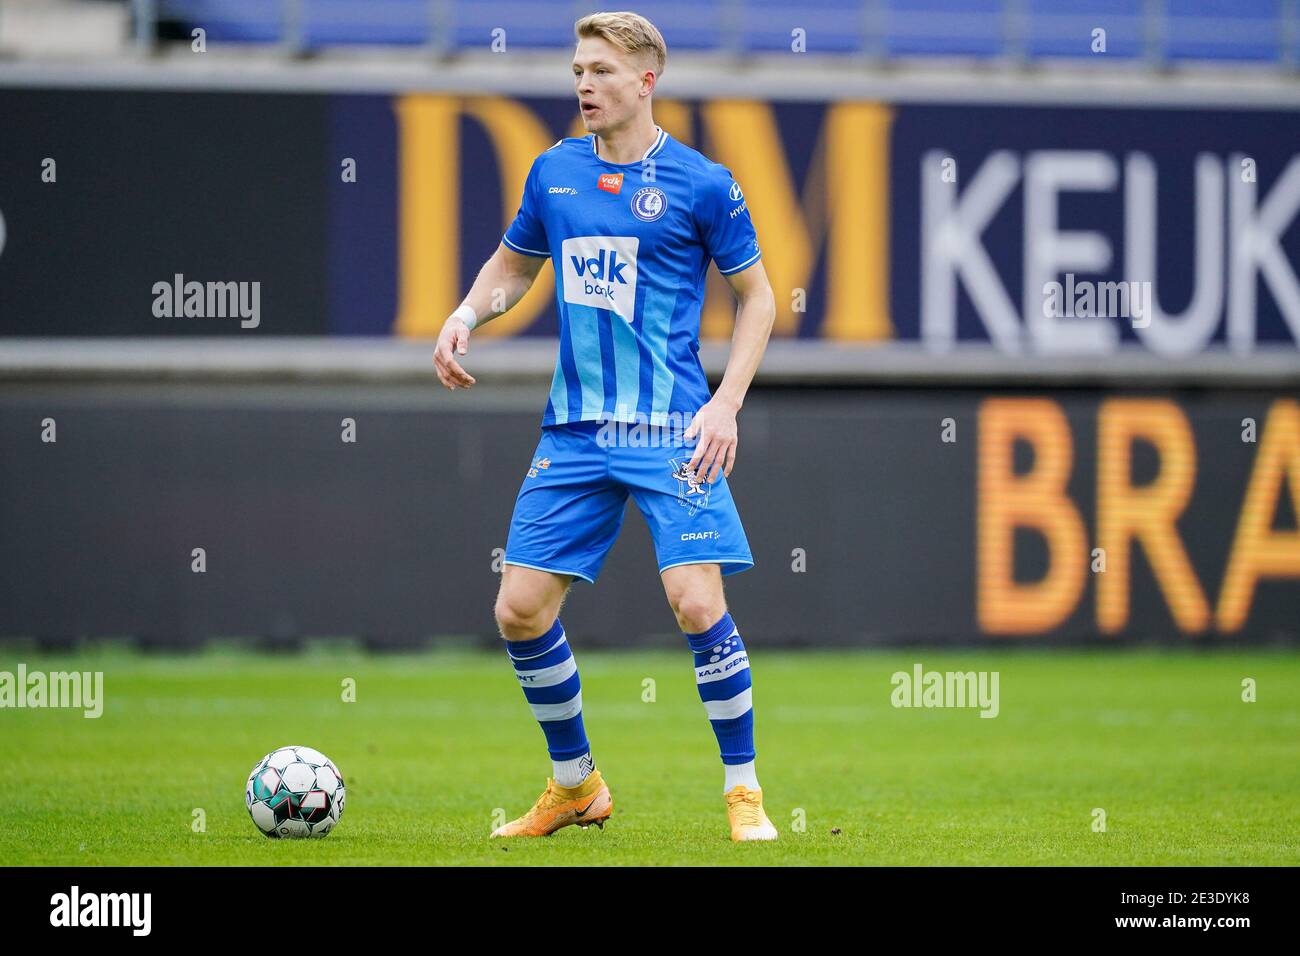 Ghent Belgium January 17 Andreas Hanche Olsen Of Kaa Gent During The Pro League Match Between Kaa Gent And Royal Antwerp Fc At Ghelamco Arena On J Stock Photo Alamy